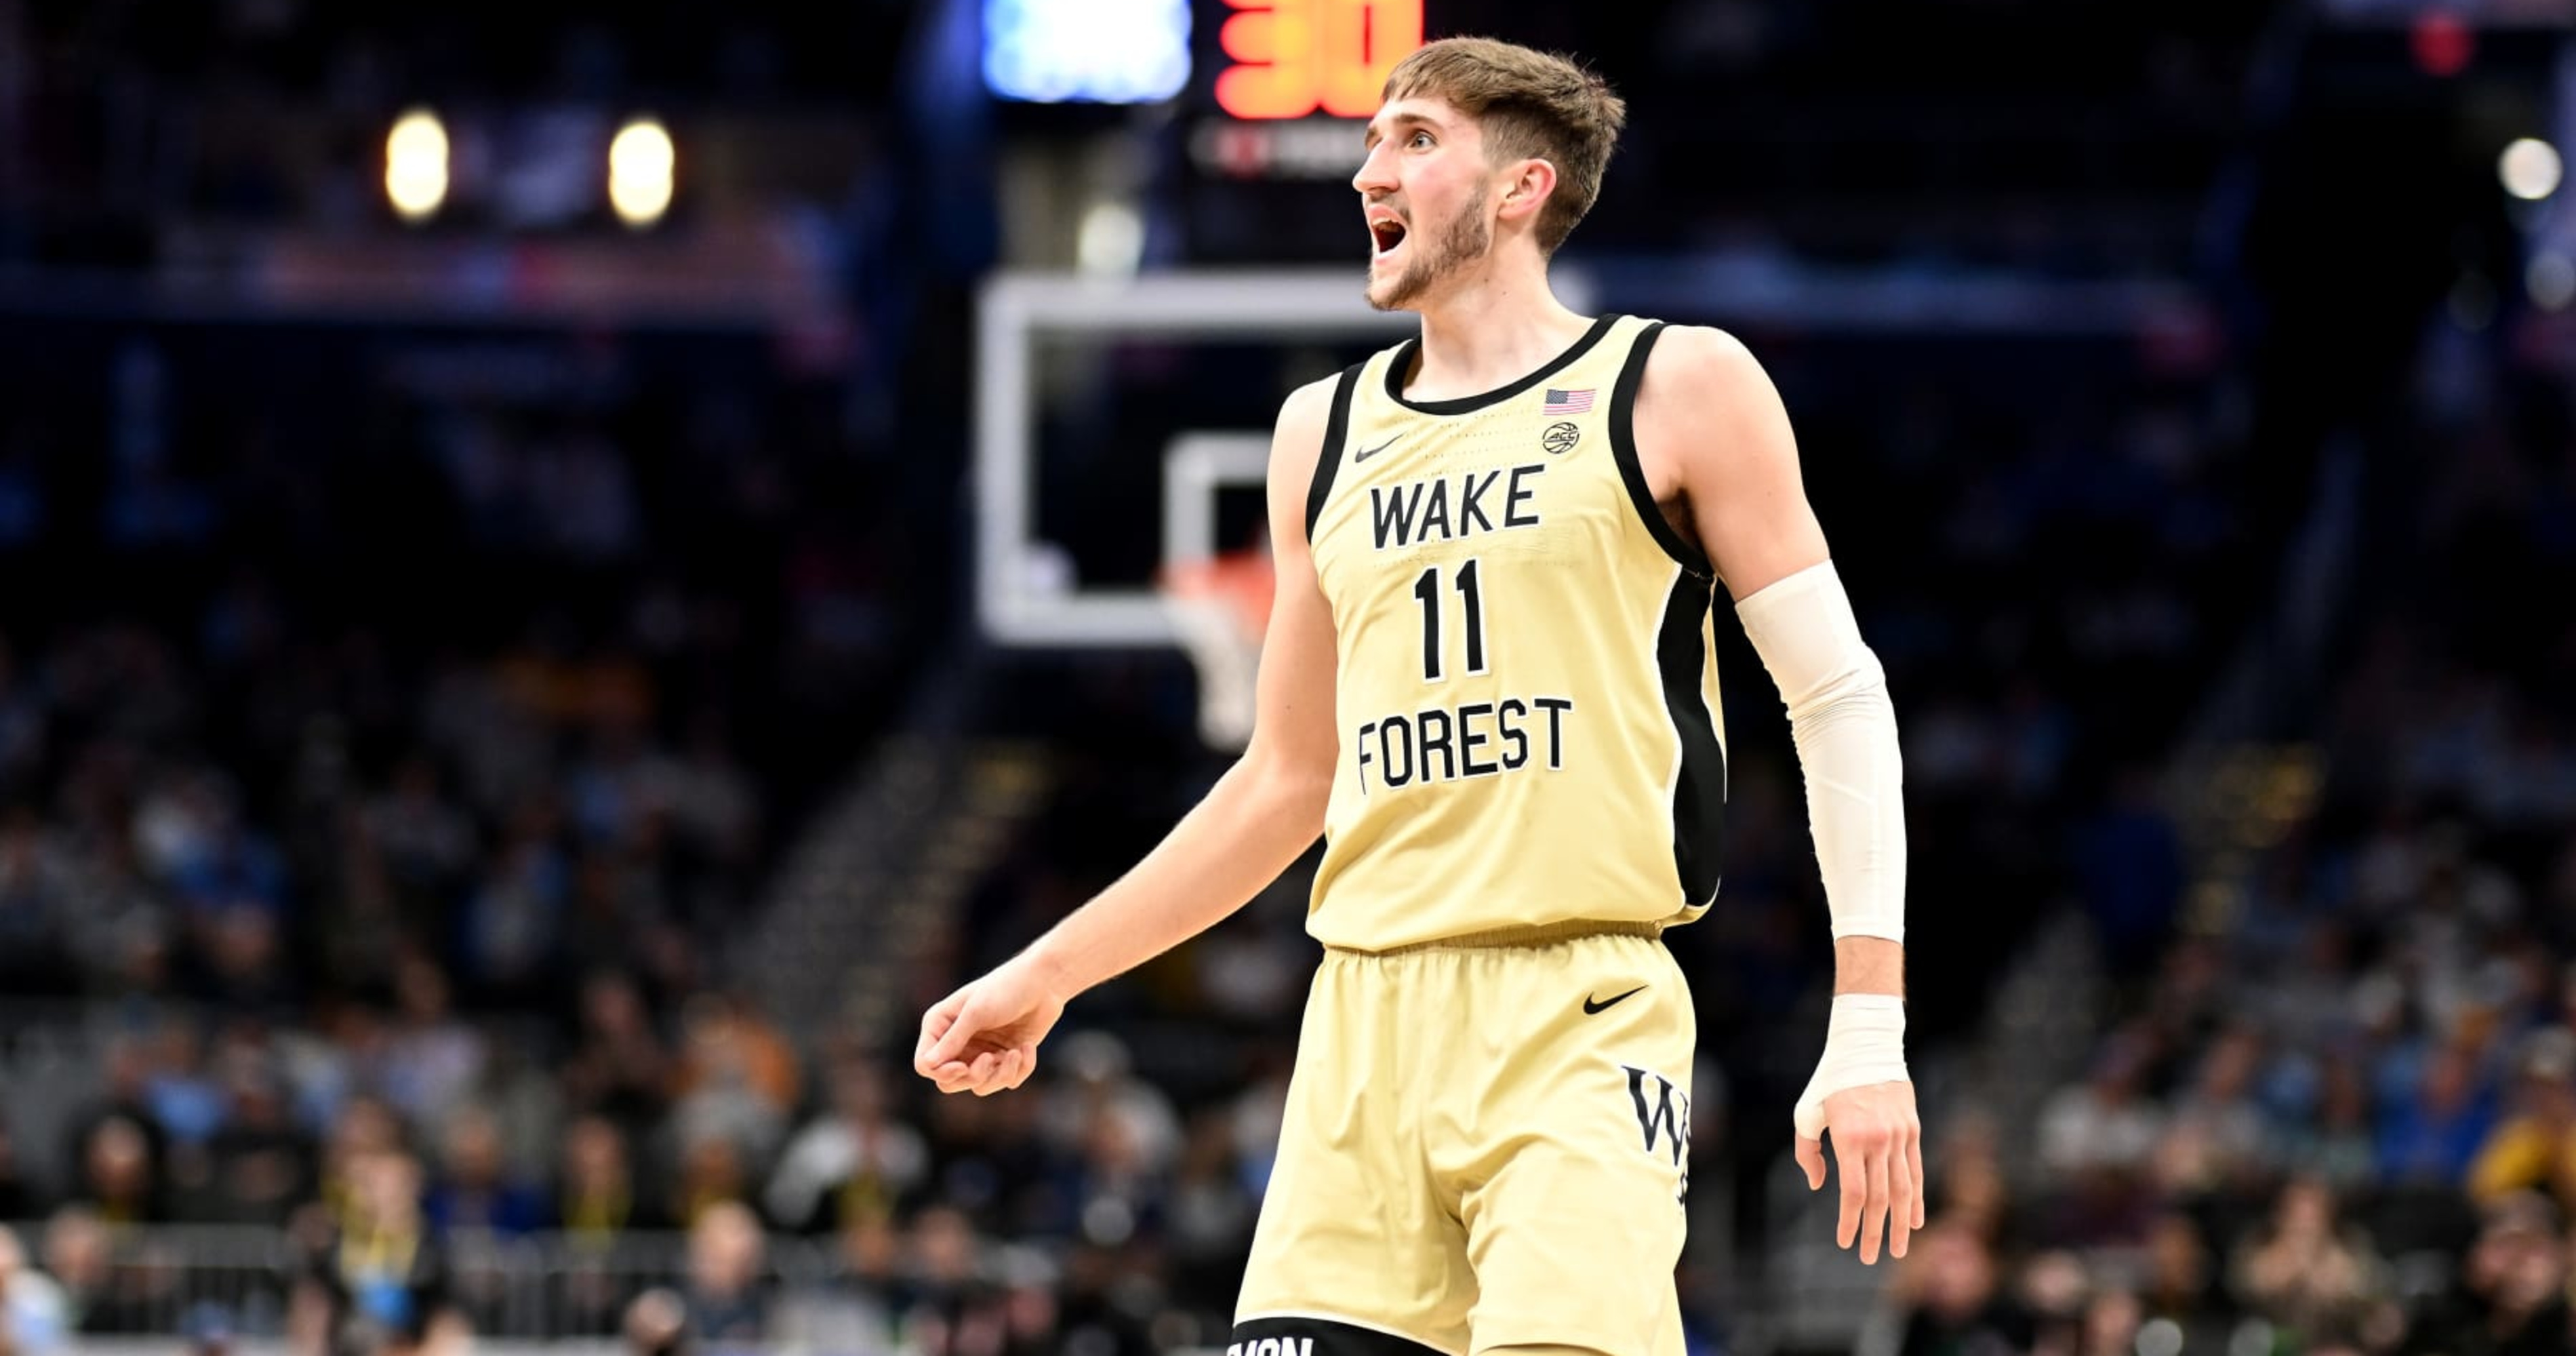 Andrew Carr Commits to Mark Pope, Kentucky After Wake Forest Transfer